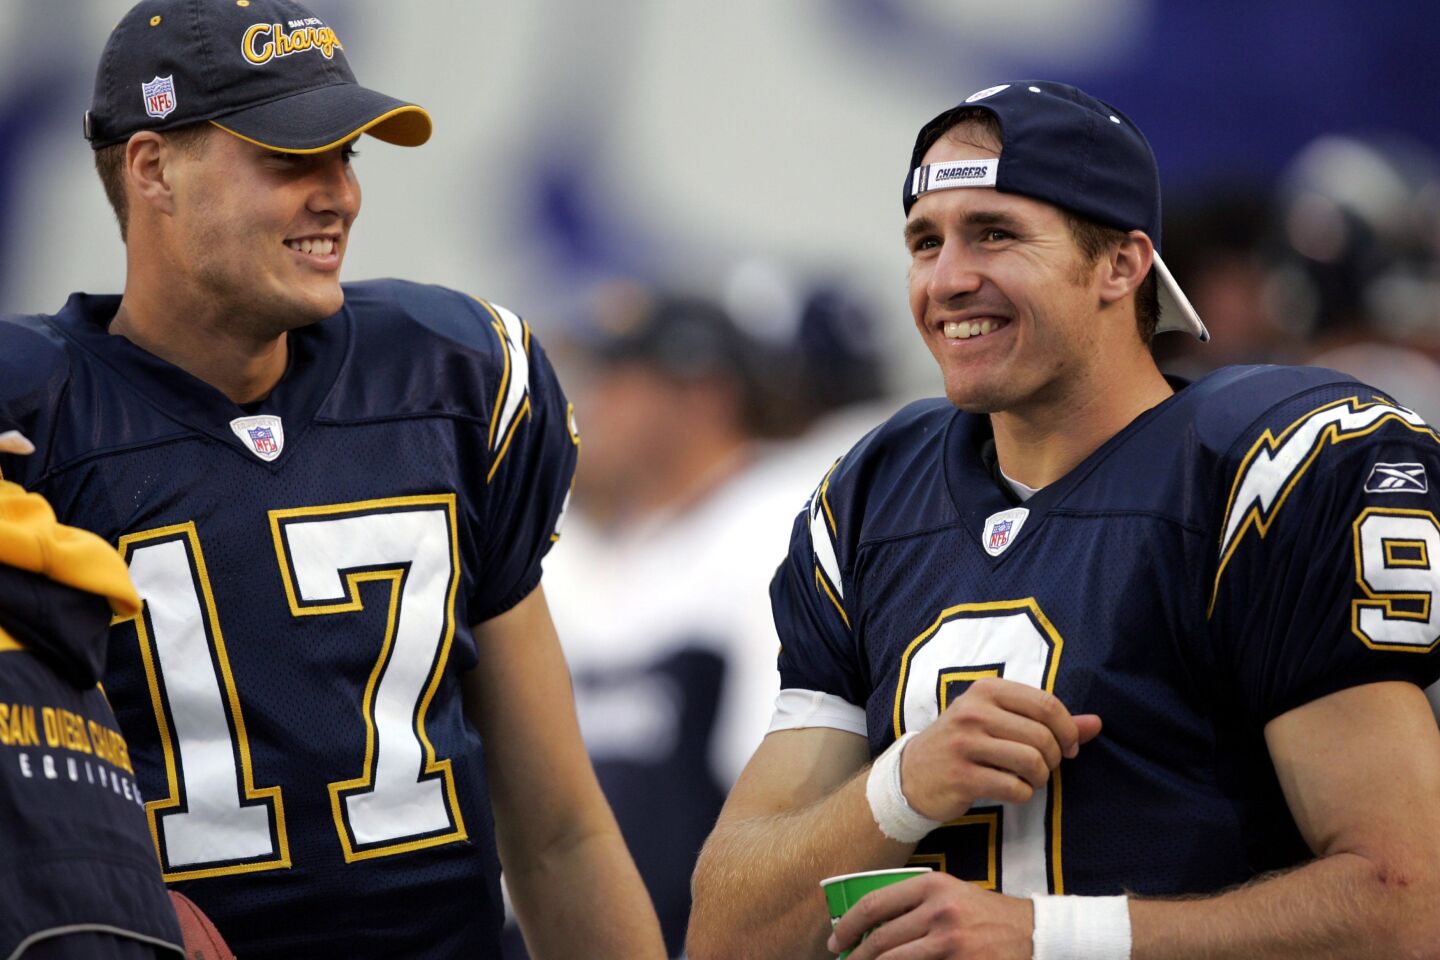 Chargers Philip Rivers and were all smiles during a game against the Saints at Qualcomm Stadium on Nov. 7, 2004.